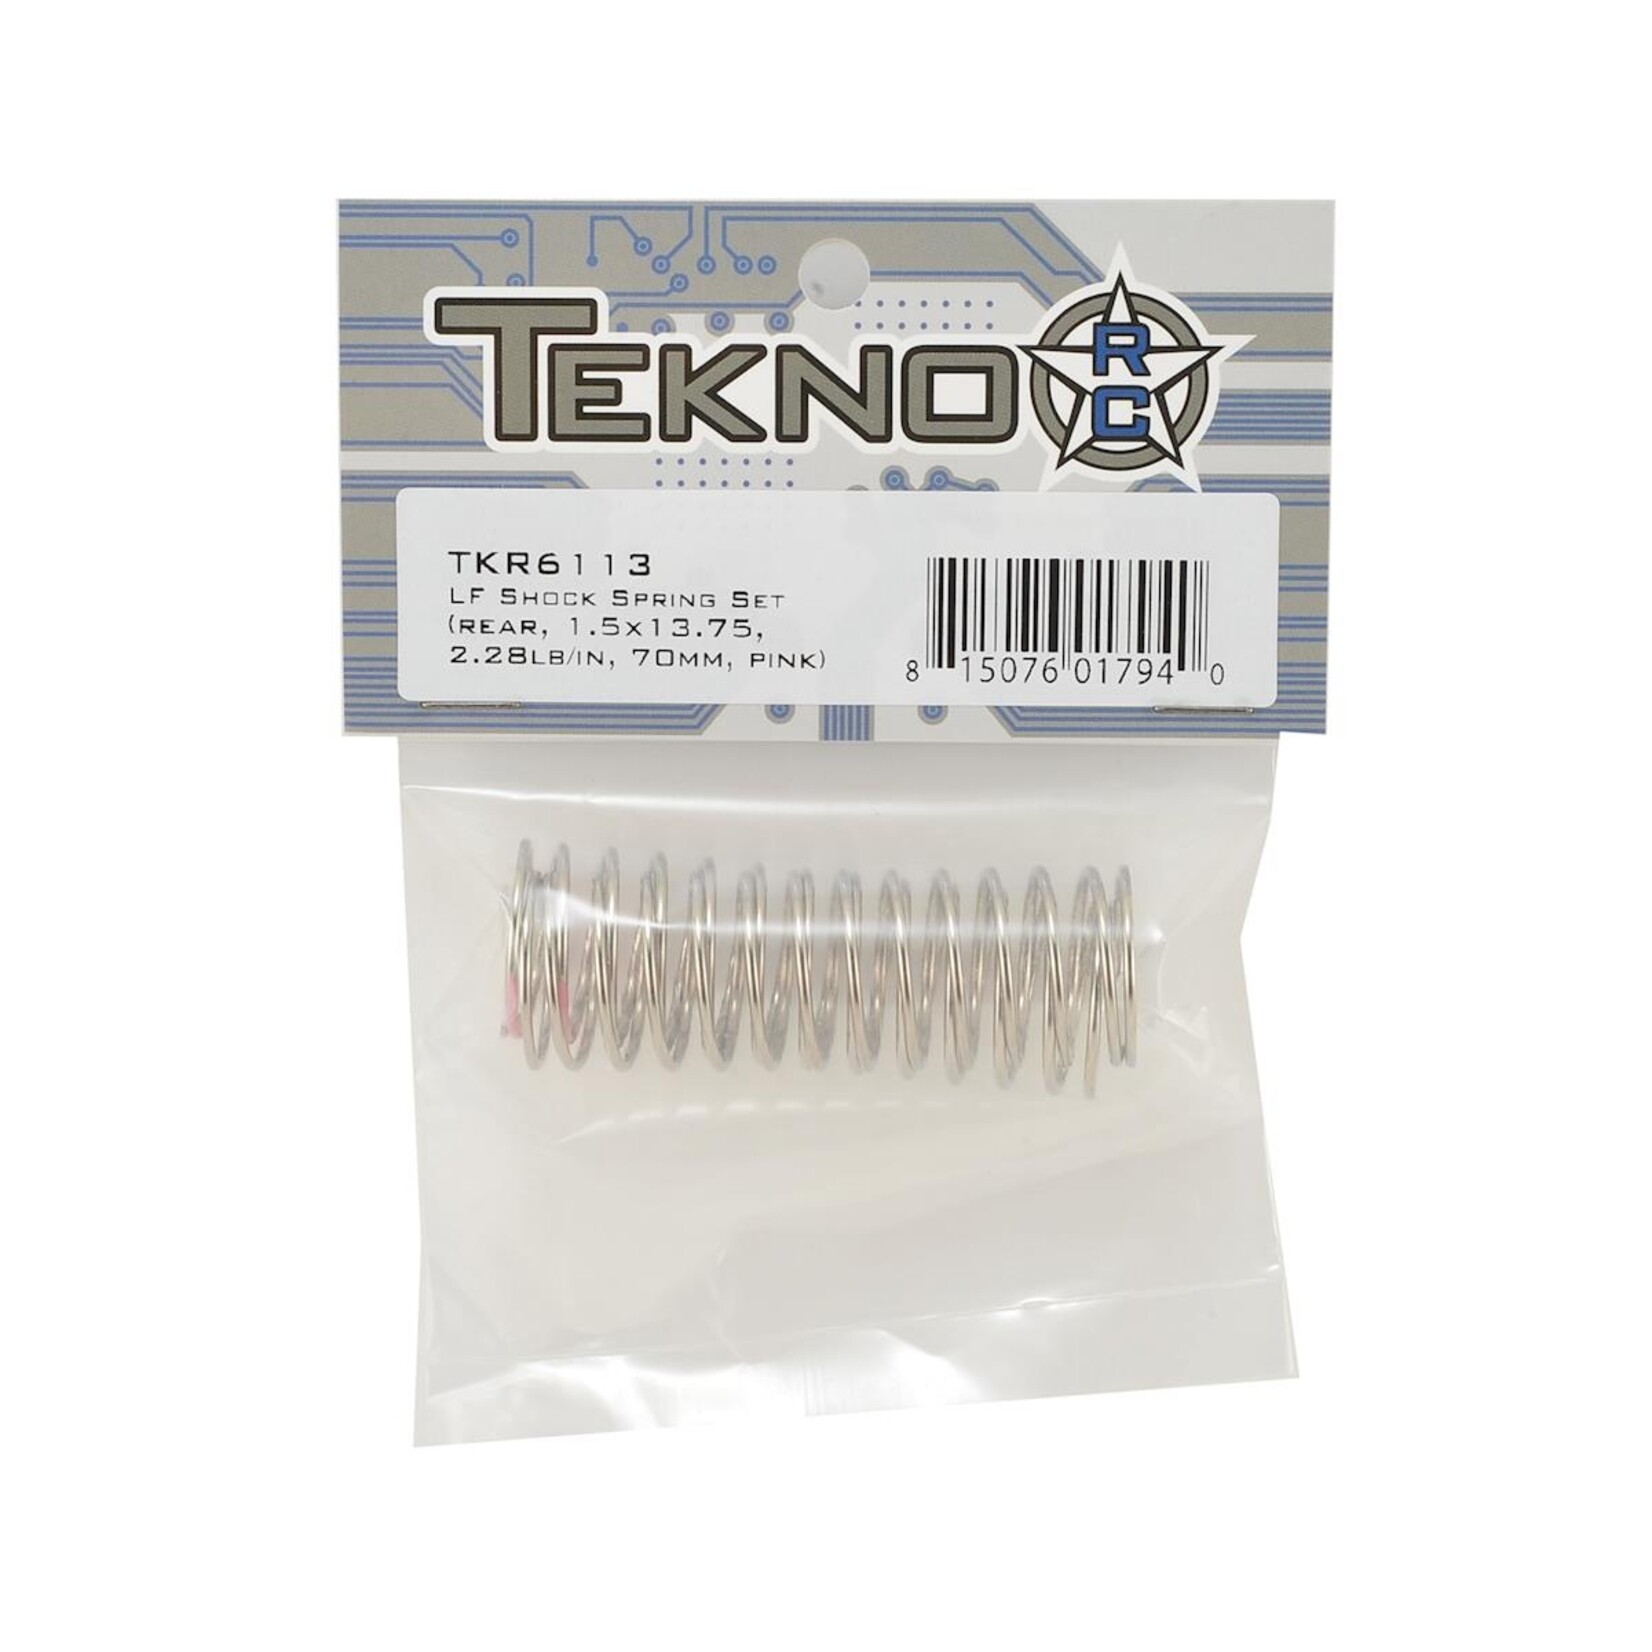 Tekno RC Tekno RC Low Frequency 70mm Rear Shock Spring Set (Pink - 2.28lb/in) 1.5x13.75) #TKR6113